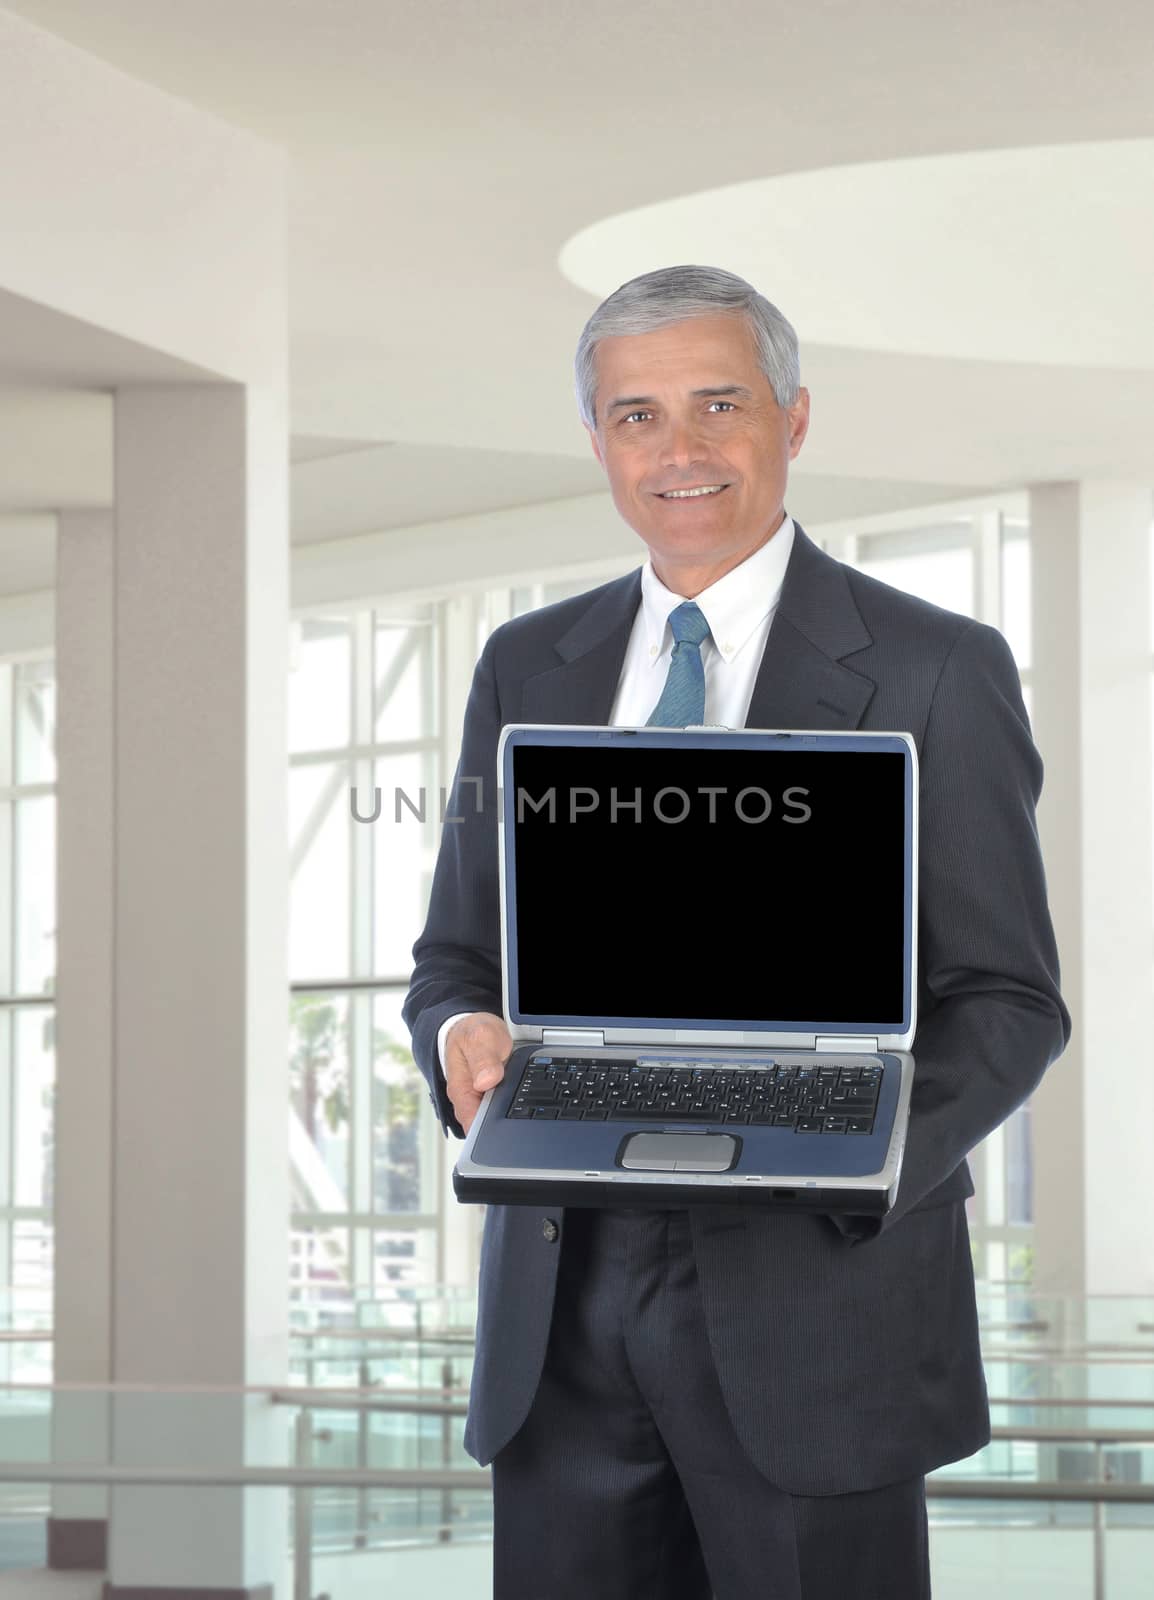 Smiling middle aged businessman holding an open laptop computer. Man is standing in the atrium of a modern office building. Vertical format.